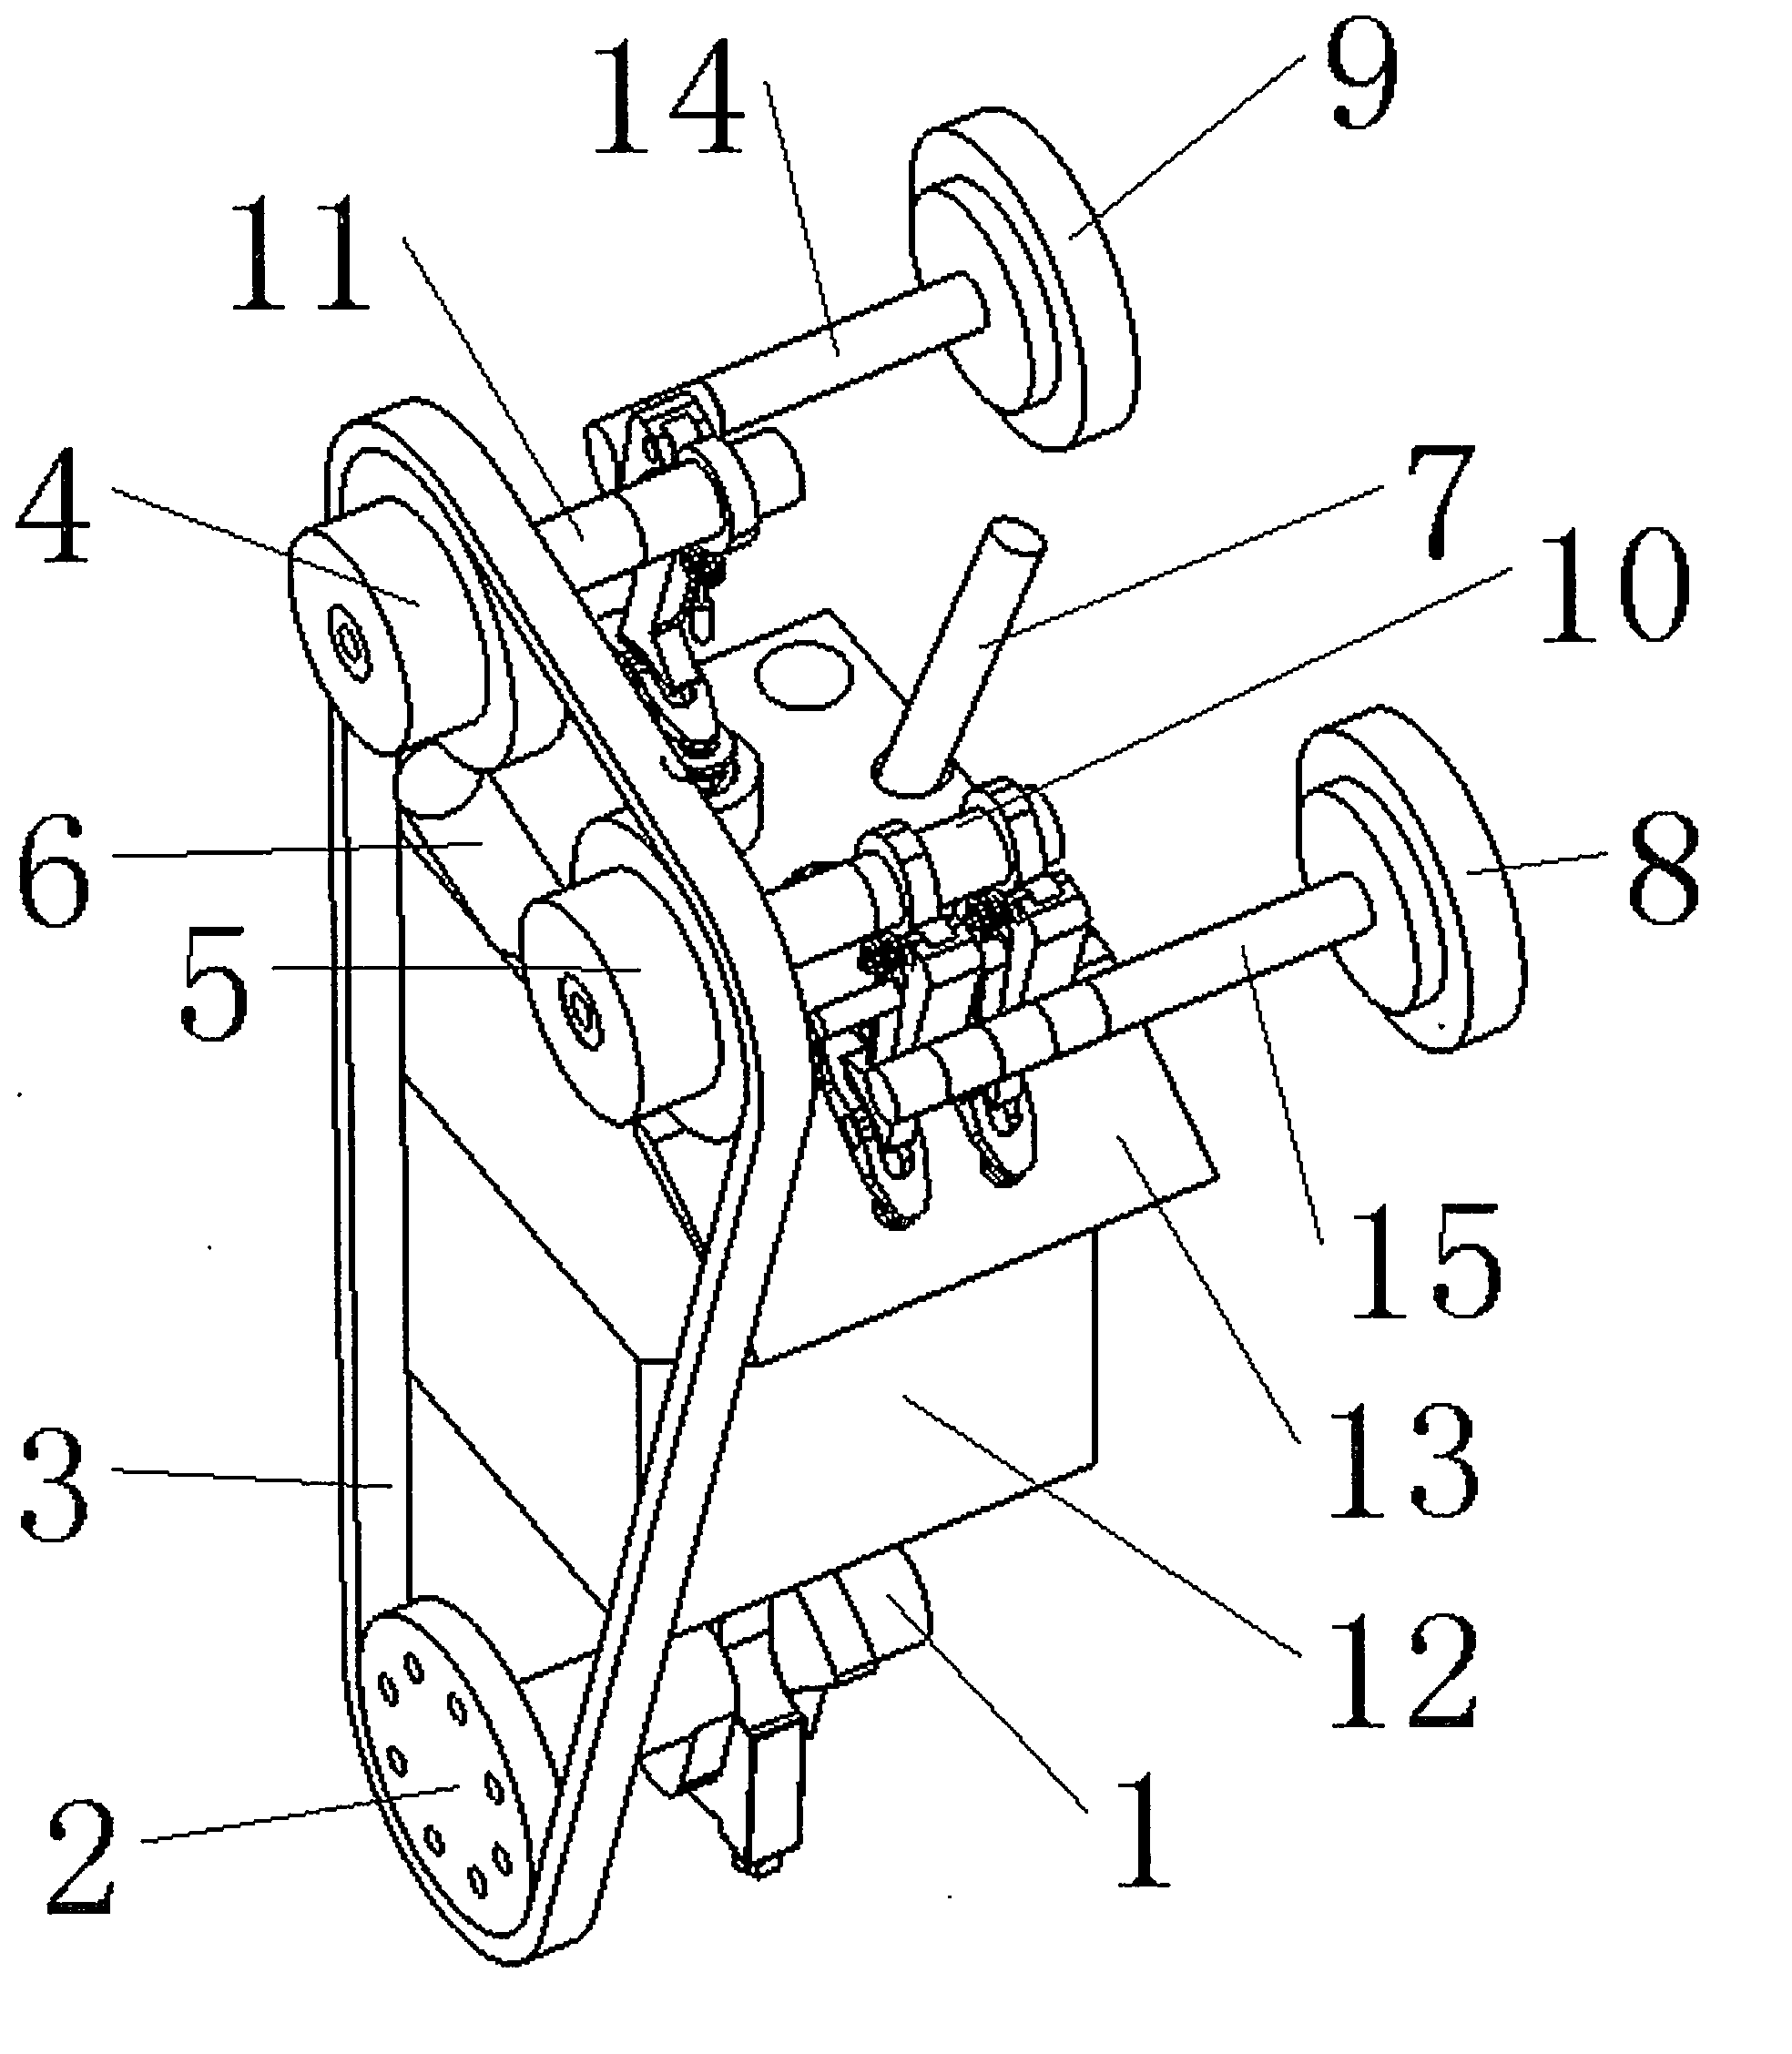 Multi-mode two-stroke atkinson cycle internal-combustion engine with fully overhead valve